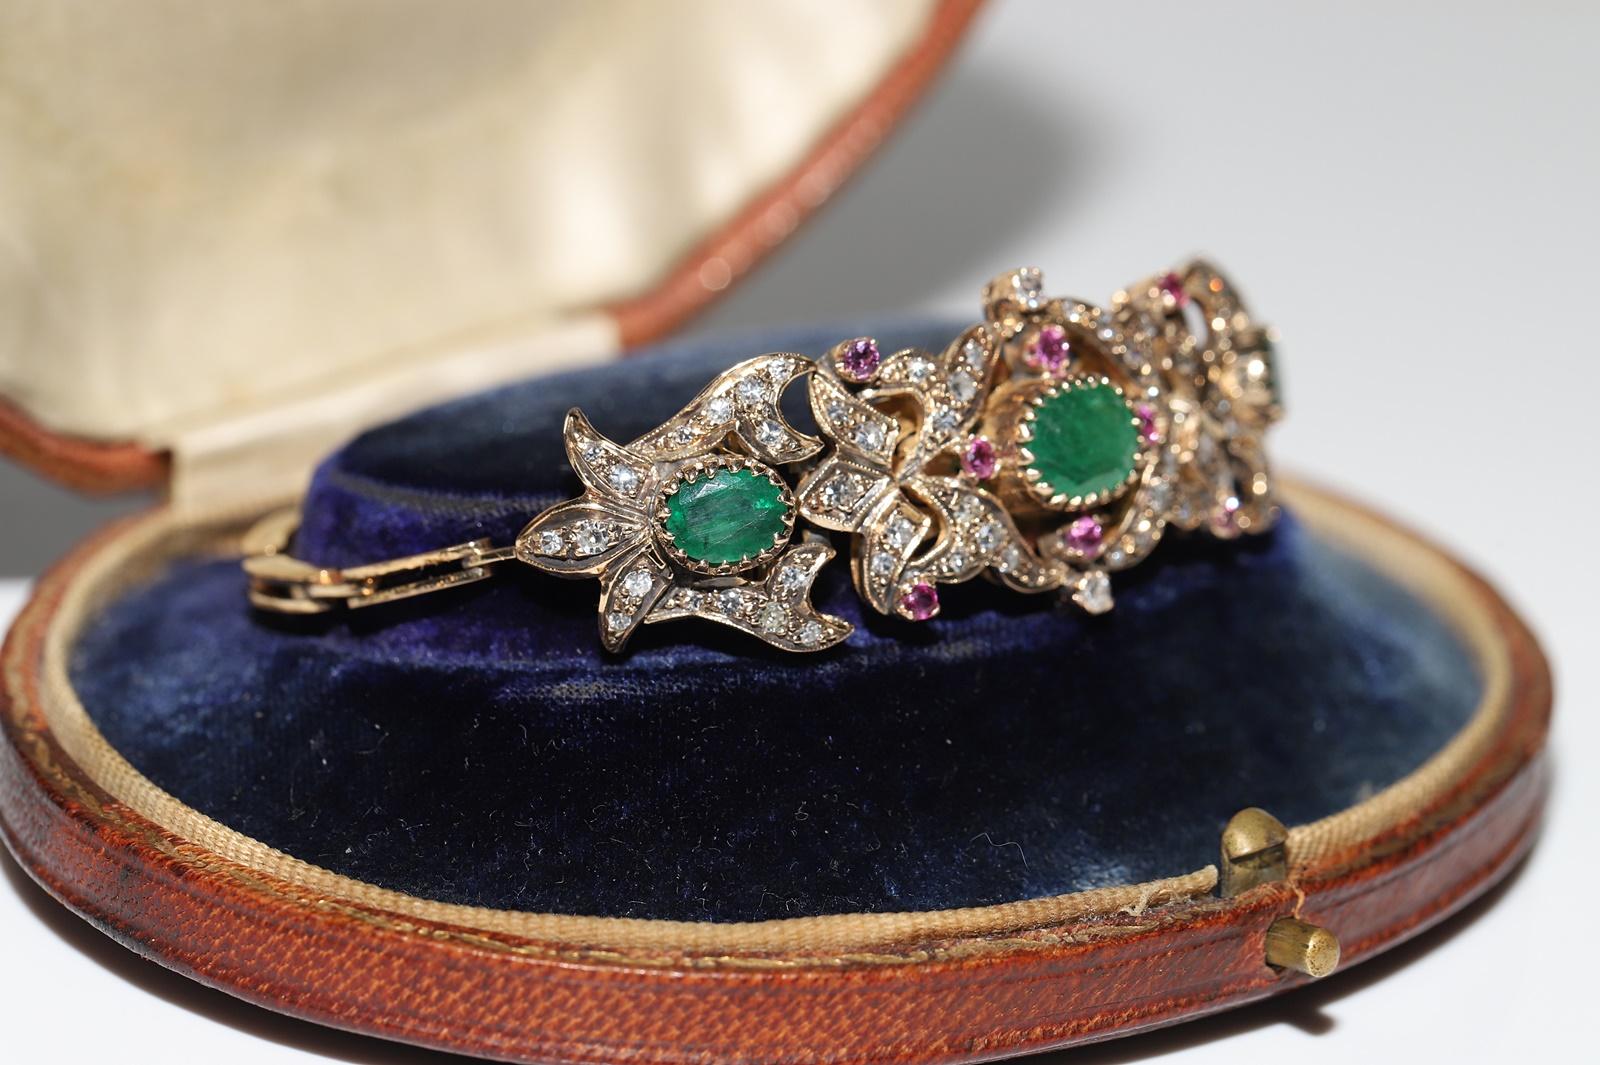 Vintage Circa 1960s 14k Gold Natural Diamond And Emerald And Ruby Bracelet For Sale 1